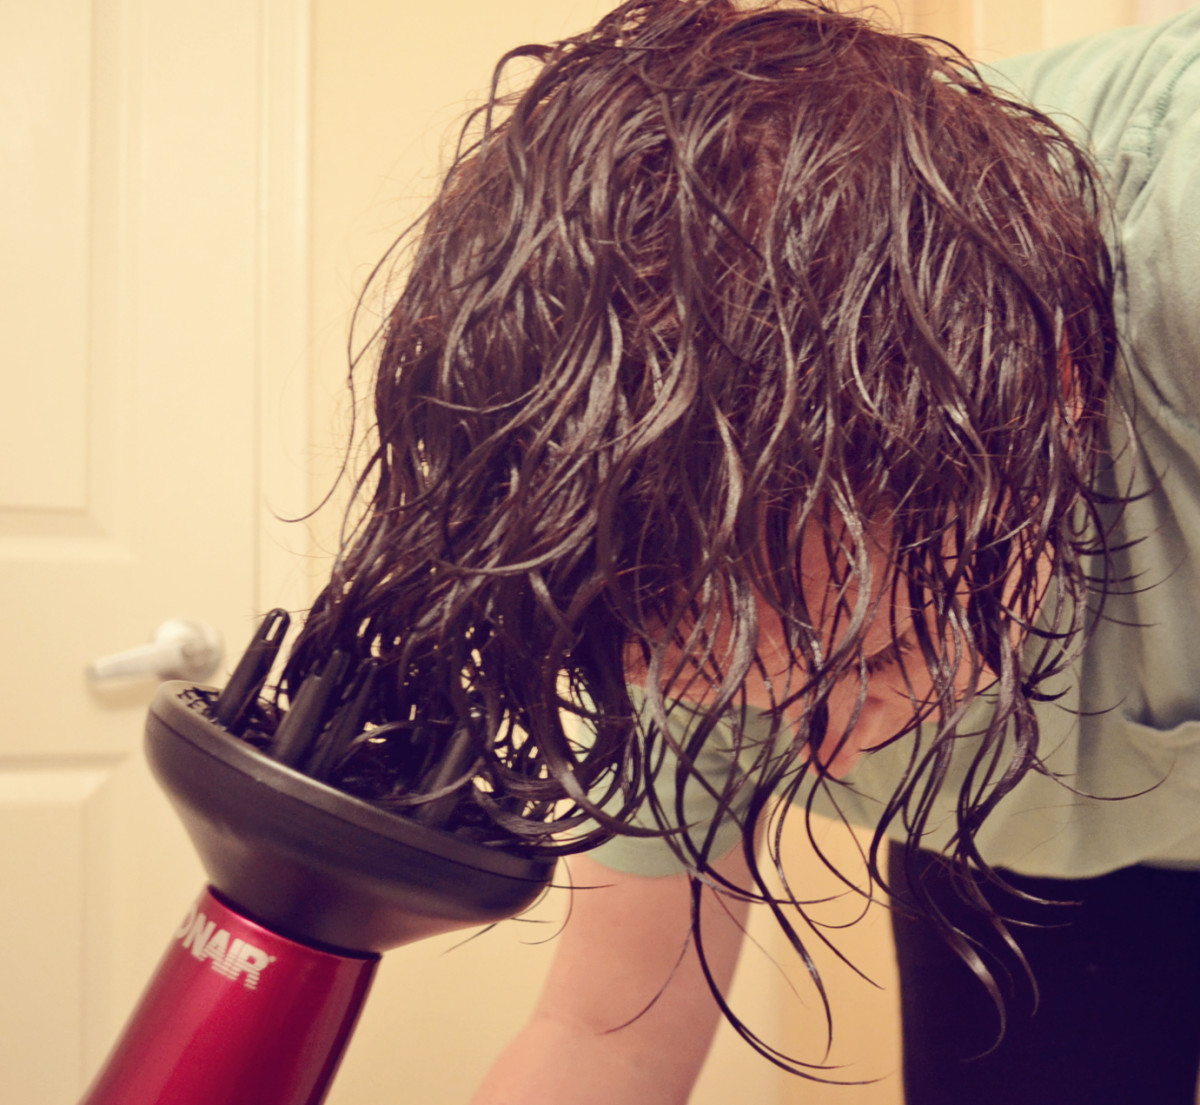 Use a diffuser to gently blow dry your hair, without straightening it.